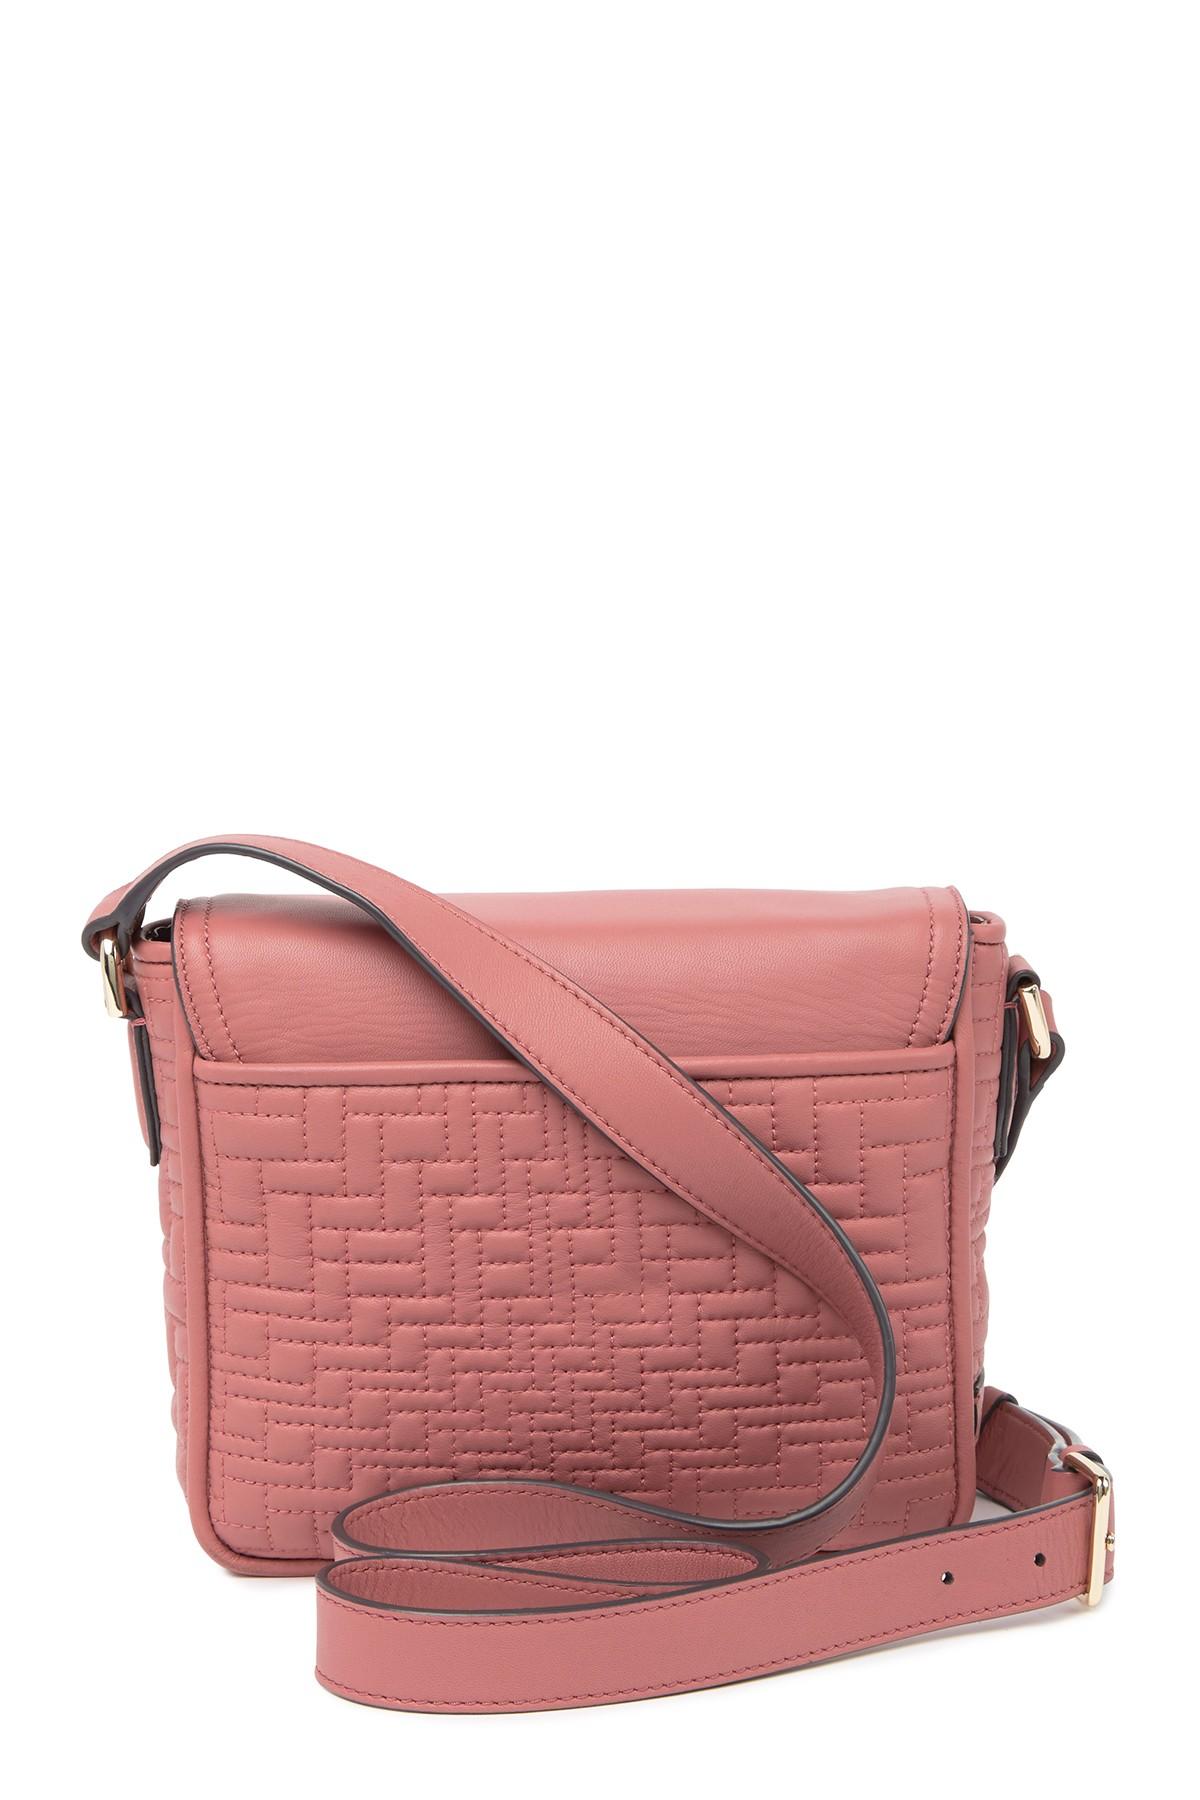 Cole Haan Quilted Leather Crossbody - Lyst